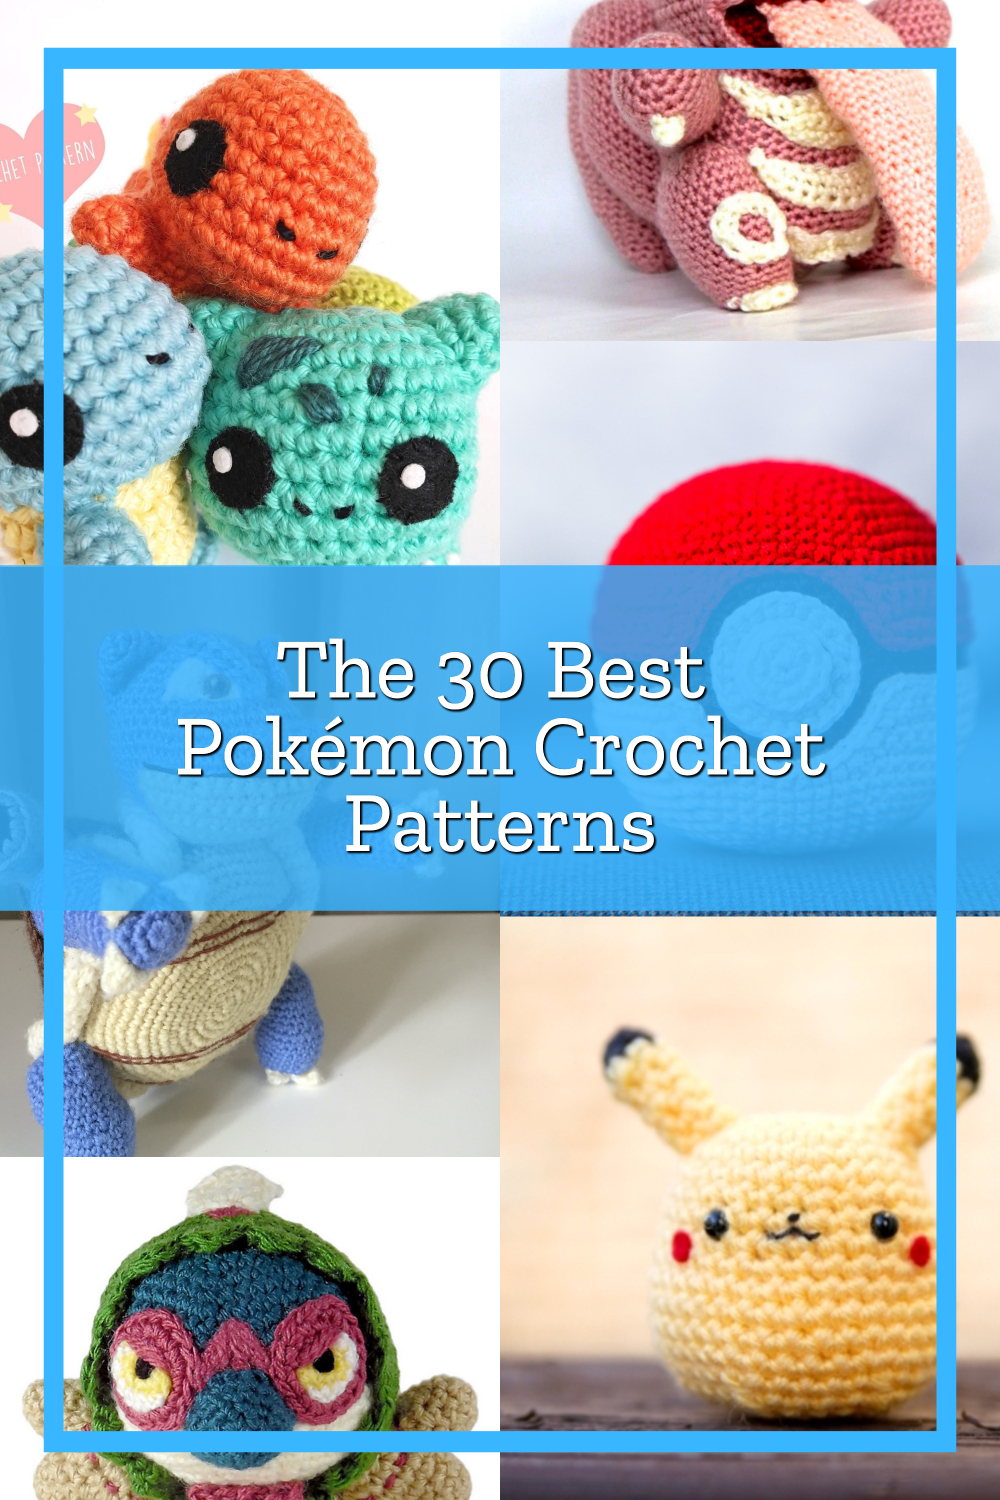 PokeMon Crochet Pikachu Kit: Kit Includes Materials to Make Pikachu and Instructions for 5 Other PokeMon [Book]